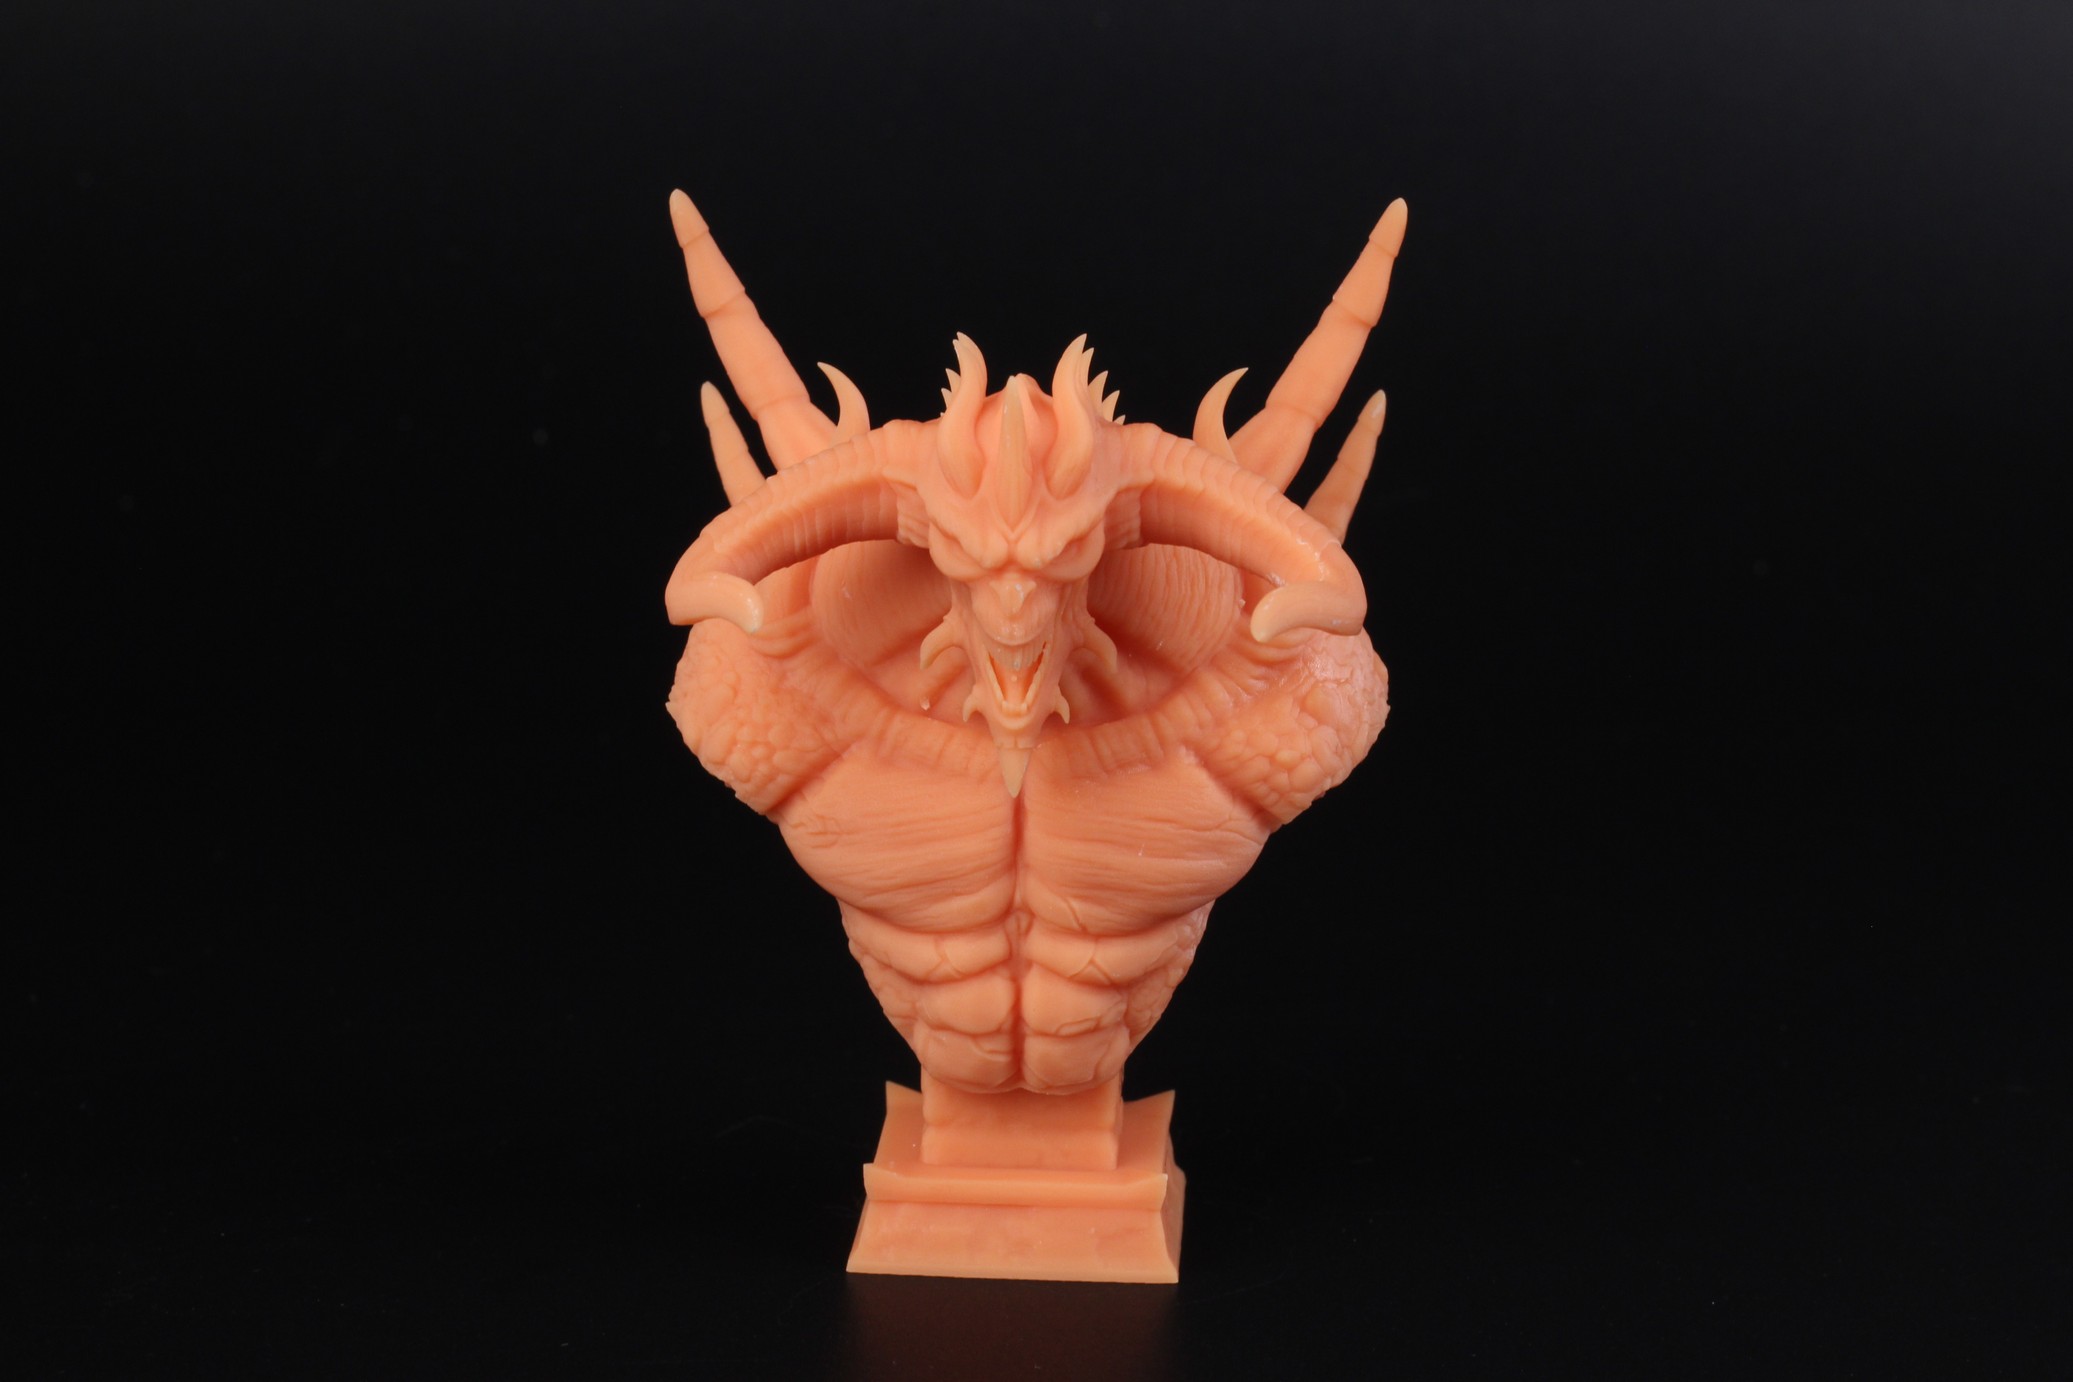 Diablo Bust printed on Anycubic Photon M3 Max 4 | Anycubic Photon M3 Max Review: Who Needs FDM Anymore?